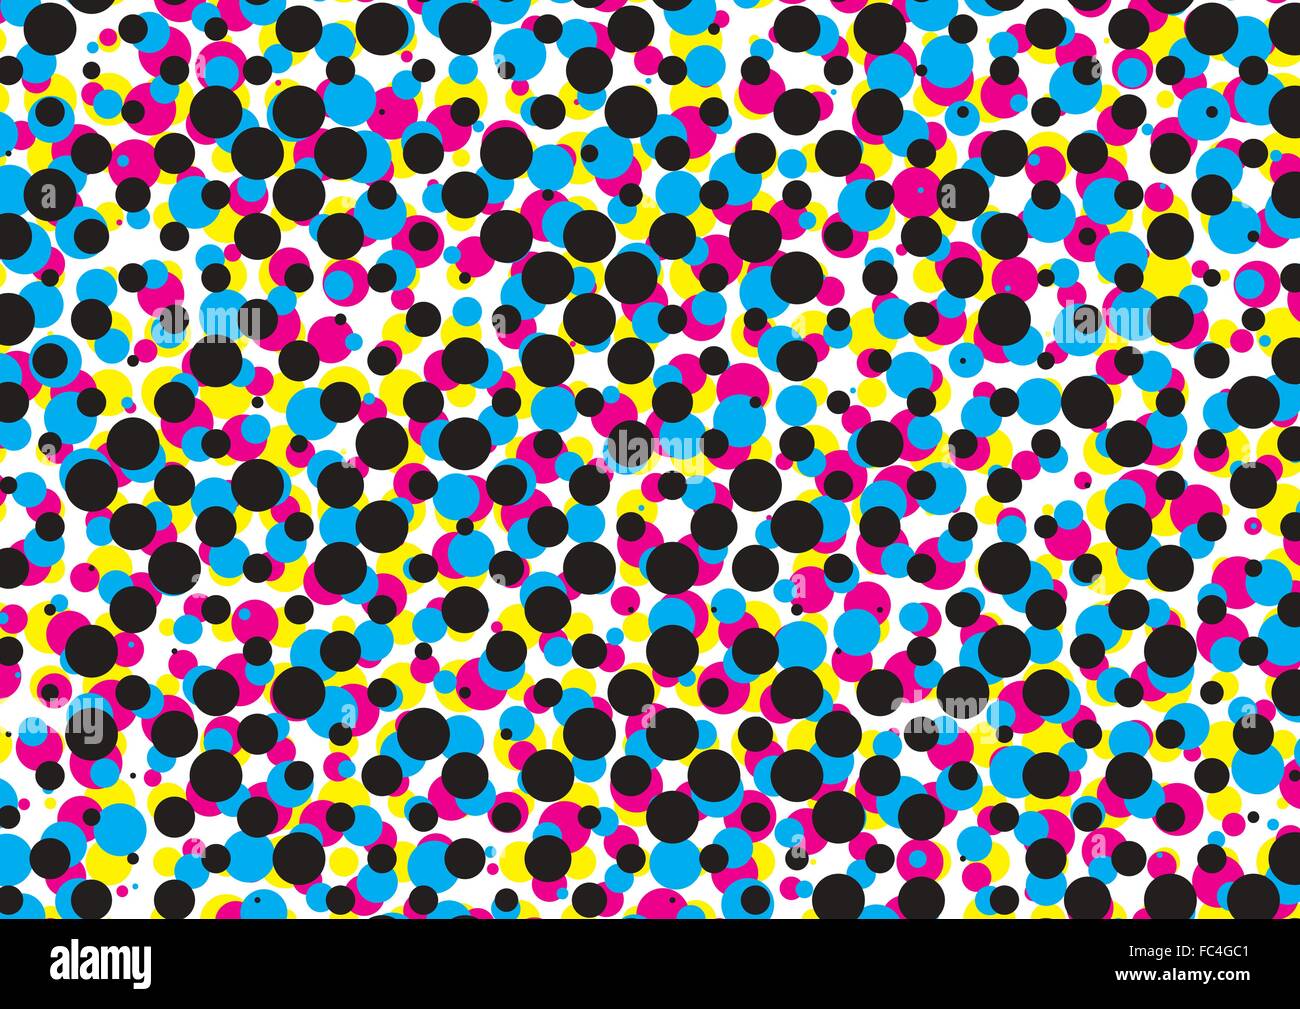 cyan, magenta, yellow, black, dot pattern, abstract vector background Stock Vector